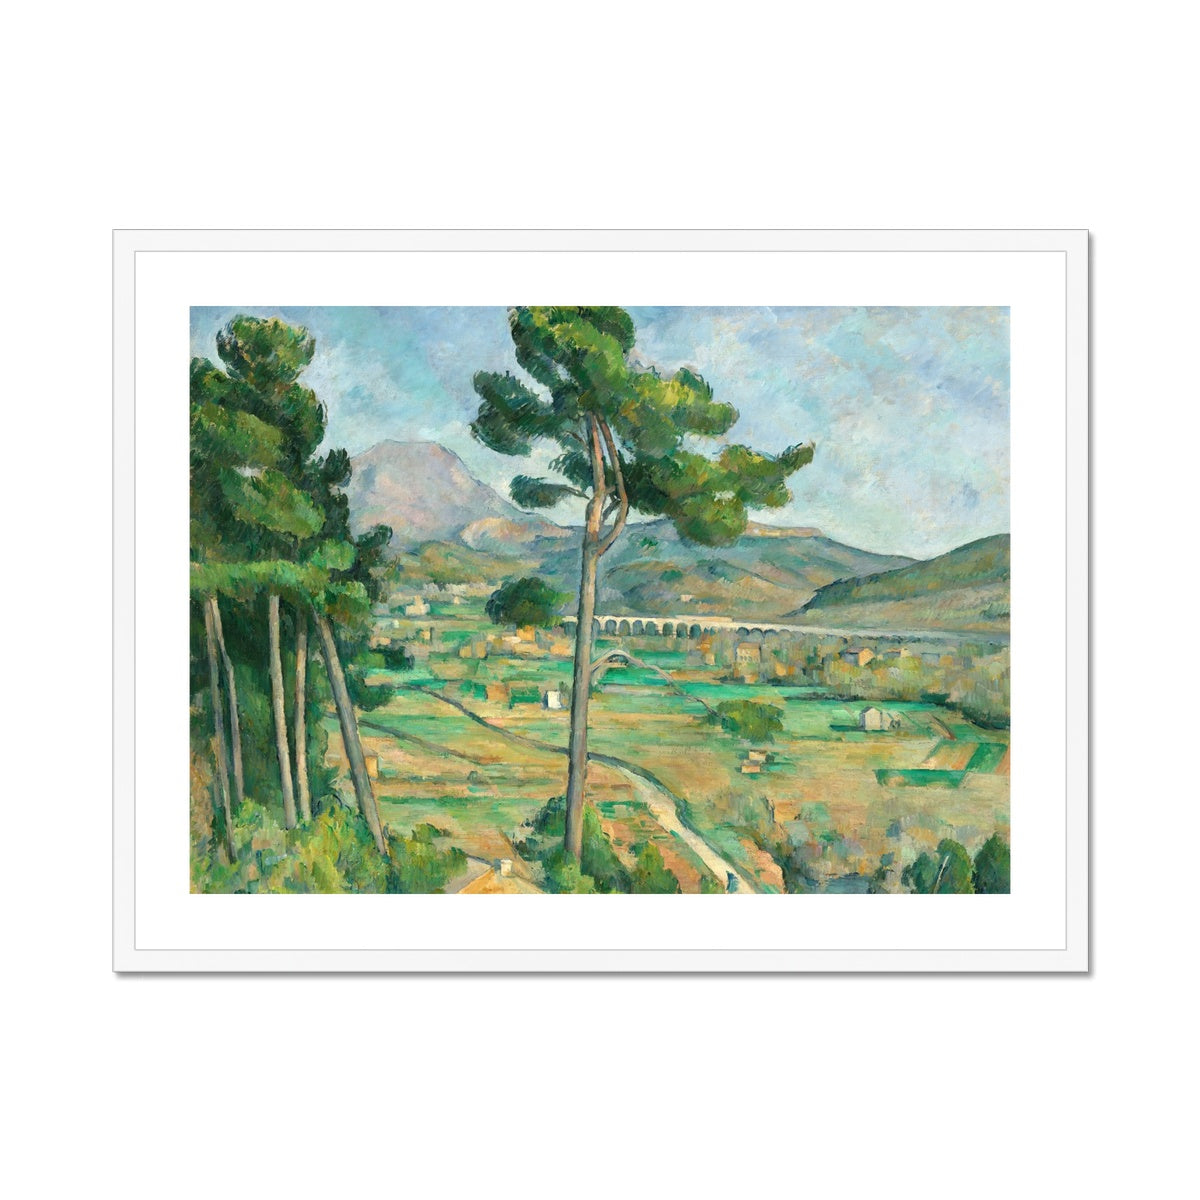 Paul Cézanne Framed Open Edition Art Print. 'Mont Sainte-Victoire and the Viaduct of the Arc River Valley'. Art Gallery Historic Art